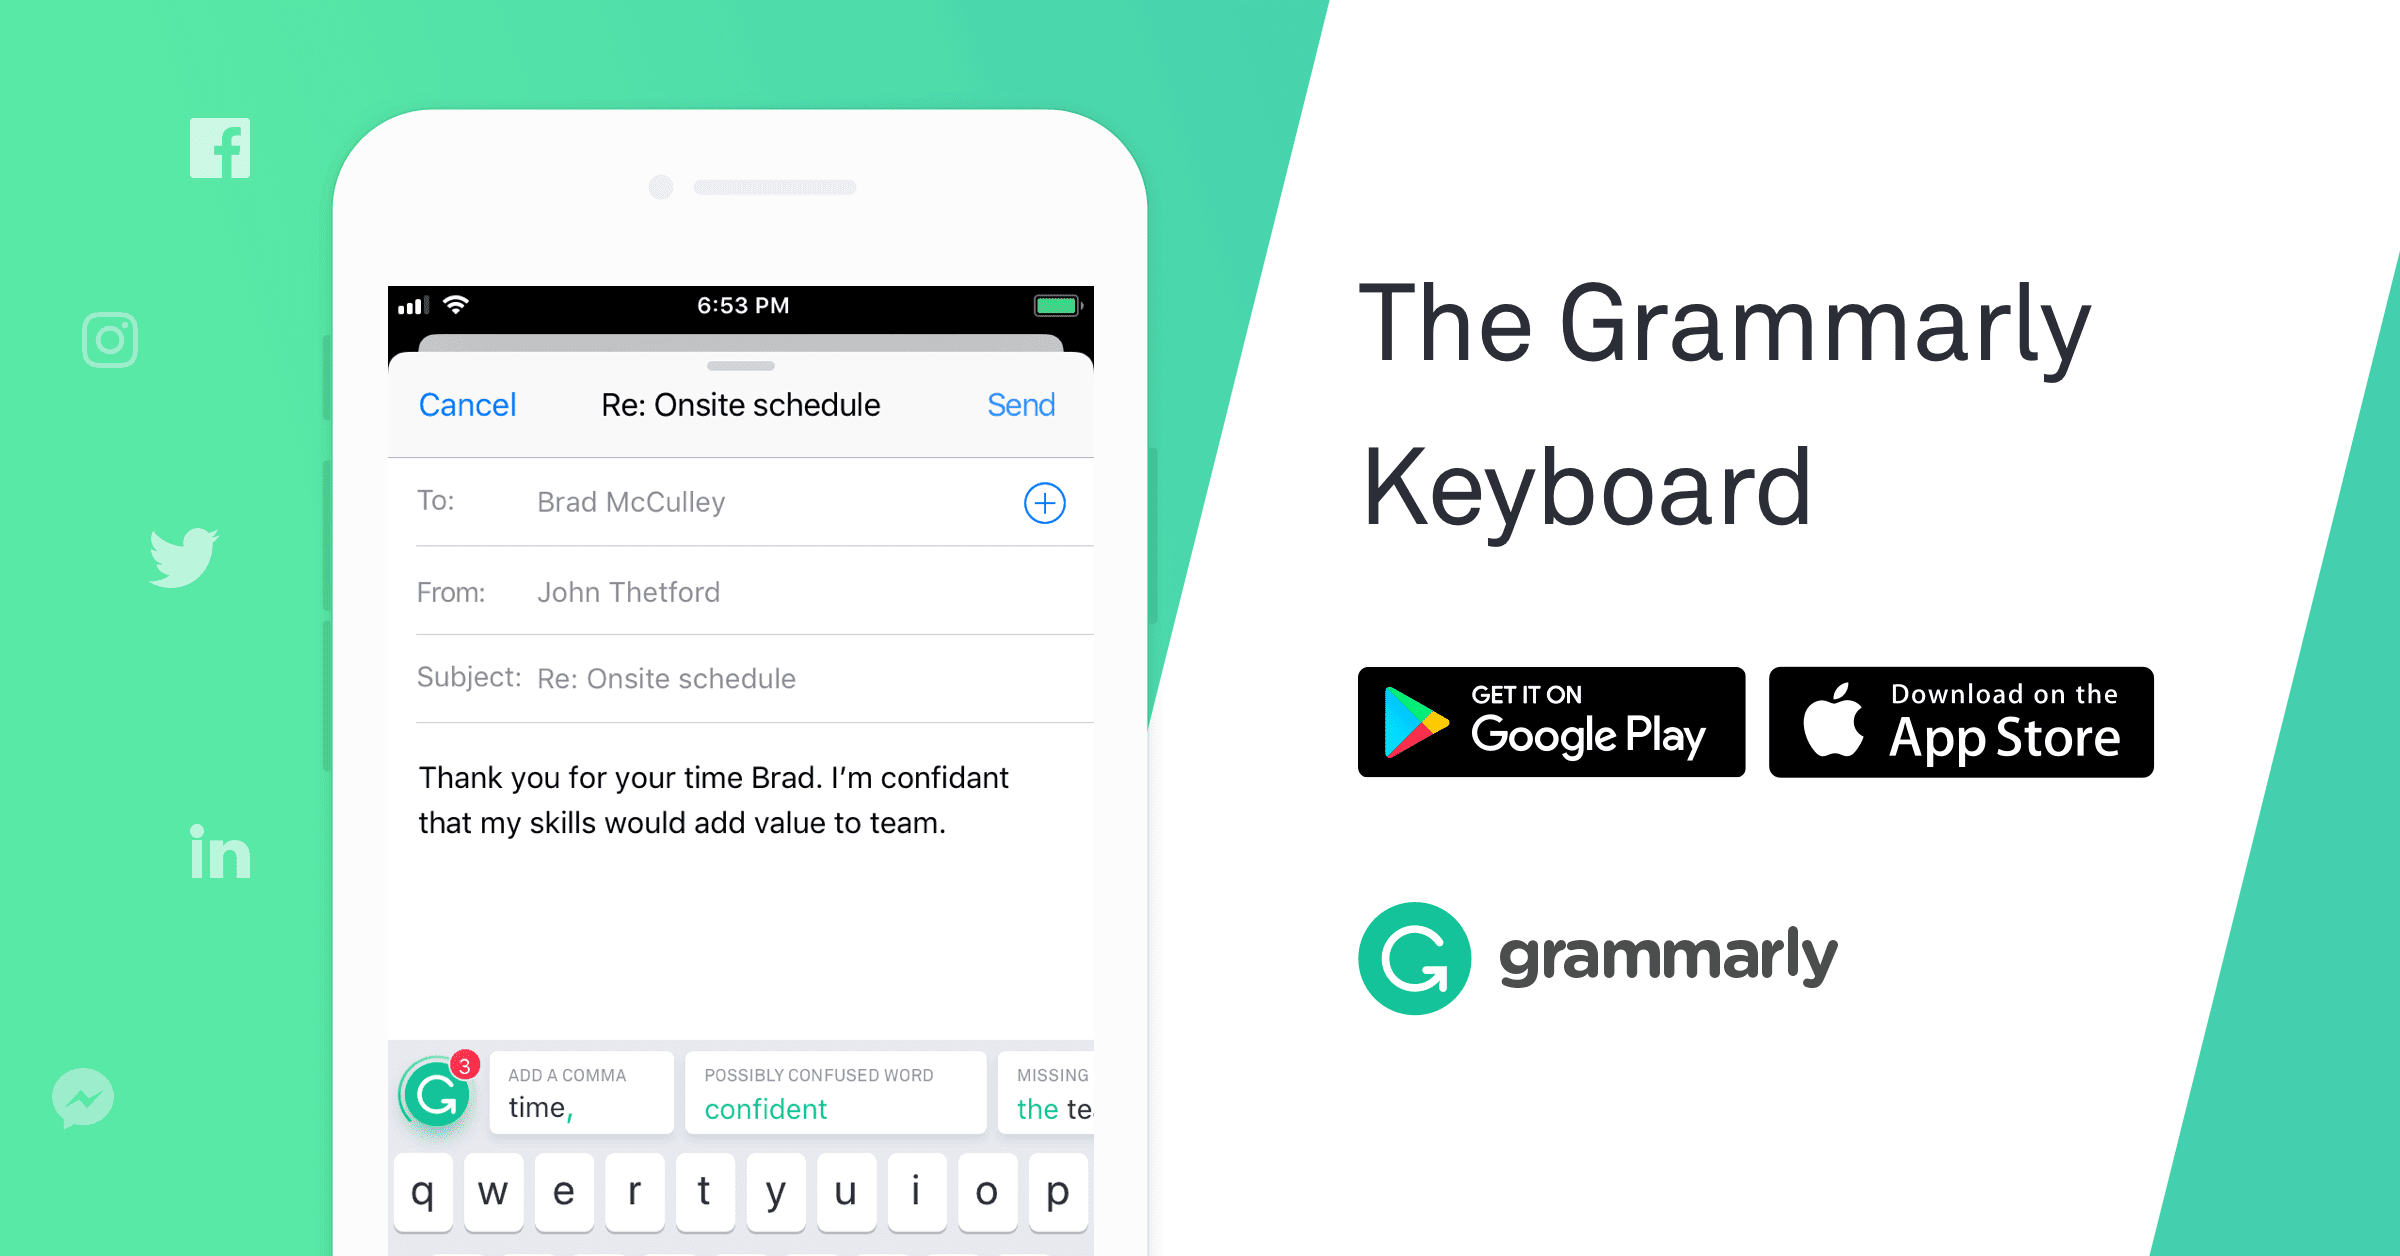 which version of grammarly is free